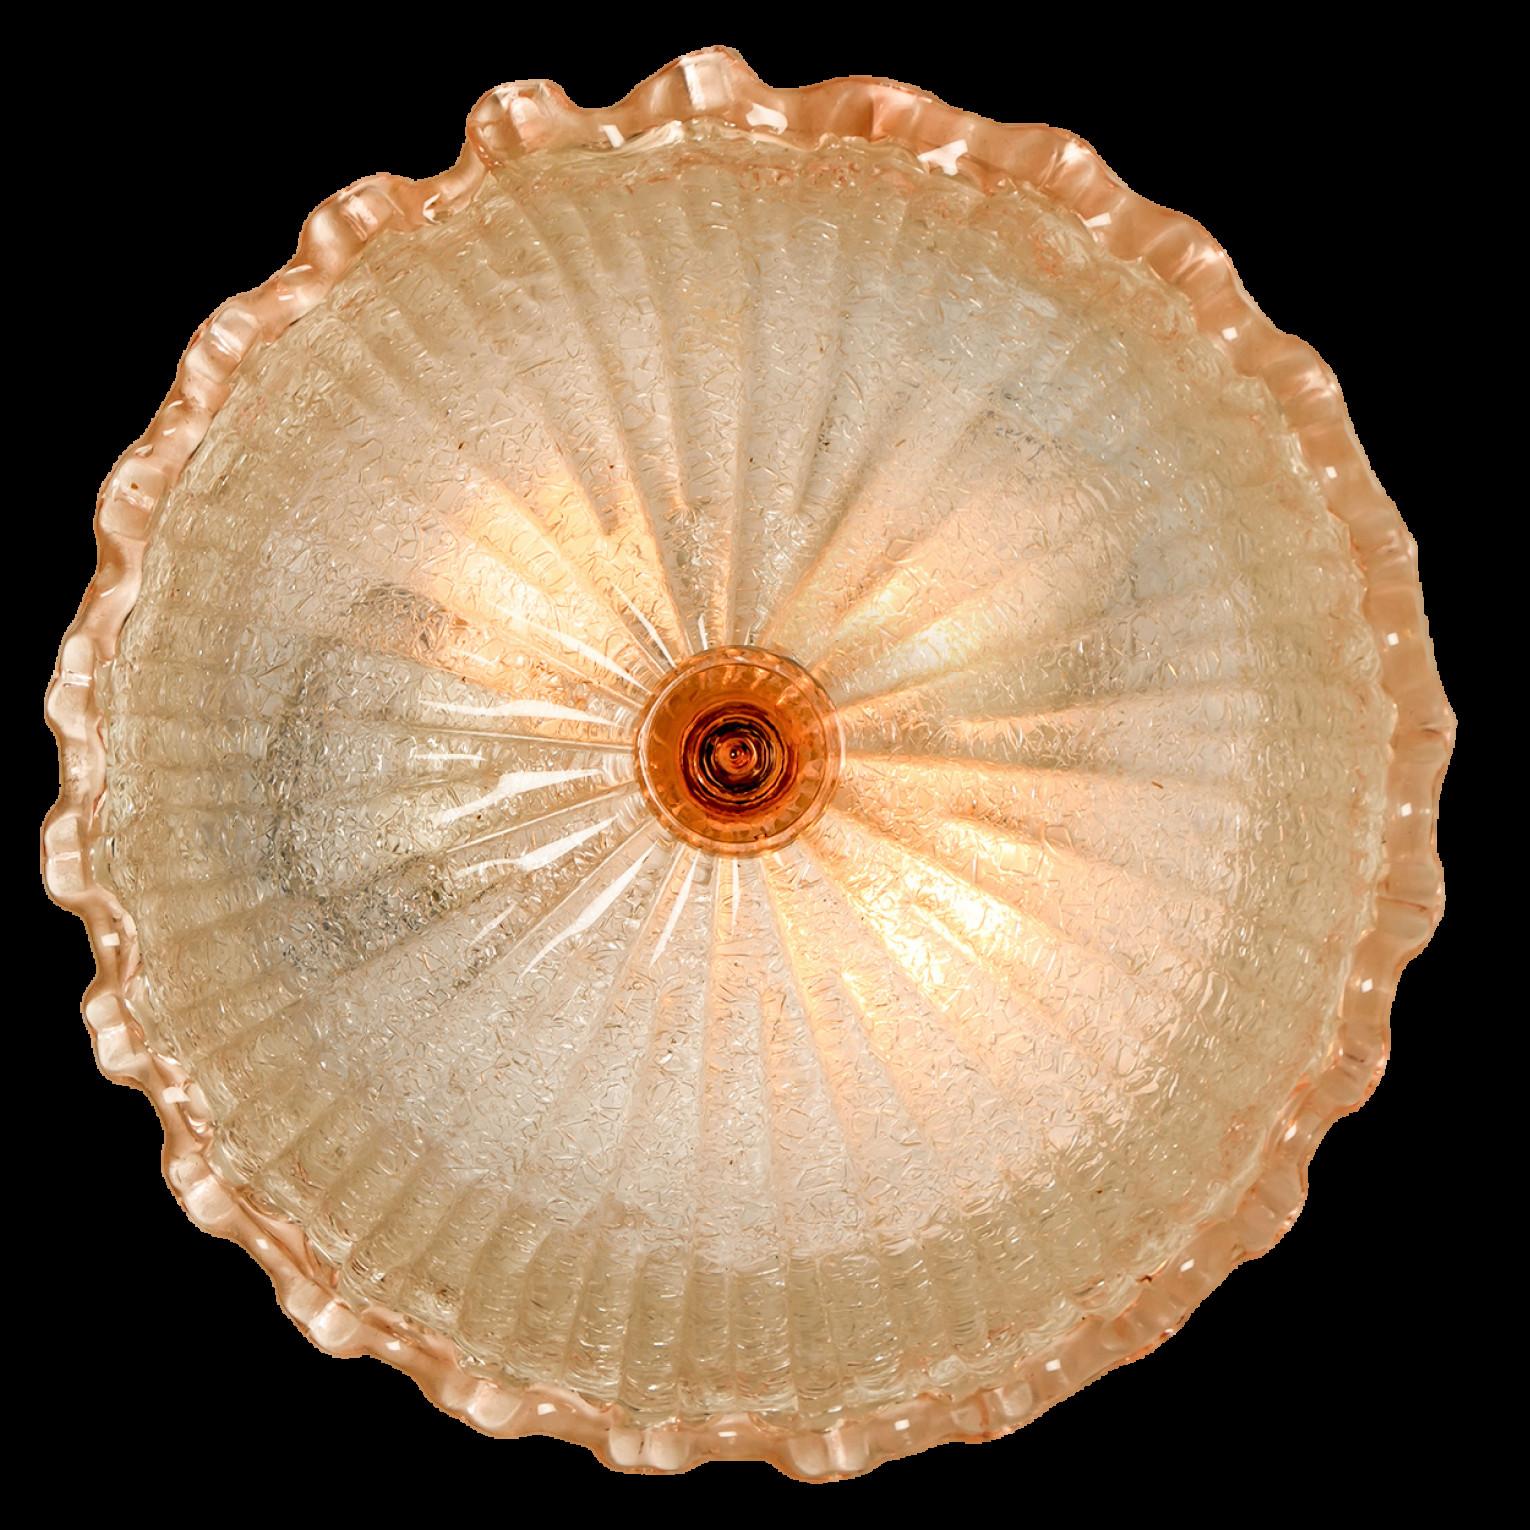 An elegant hand blown Murano glass flush mount in the style of Barovier & Toso. Mounted on a white frame. With light pink and clear colored glass. The textured glass refract light beautifully. The flush mount fills the room with a soft, warm and